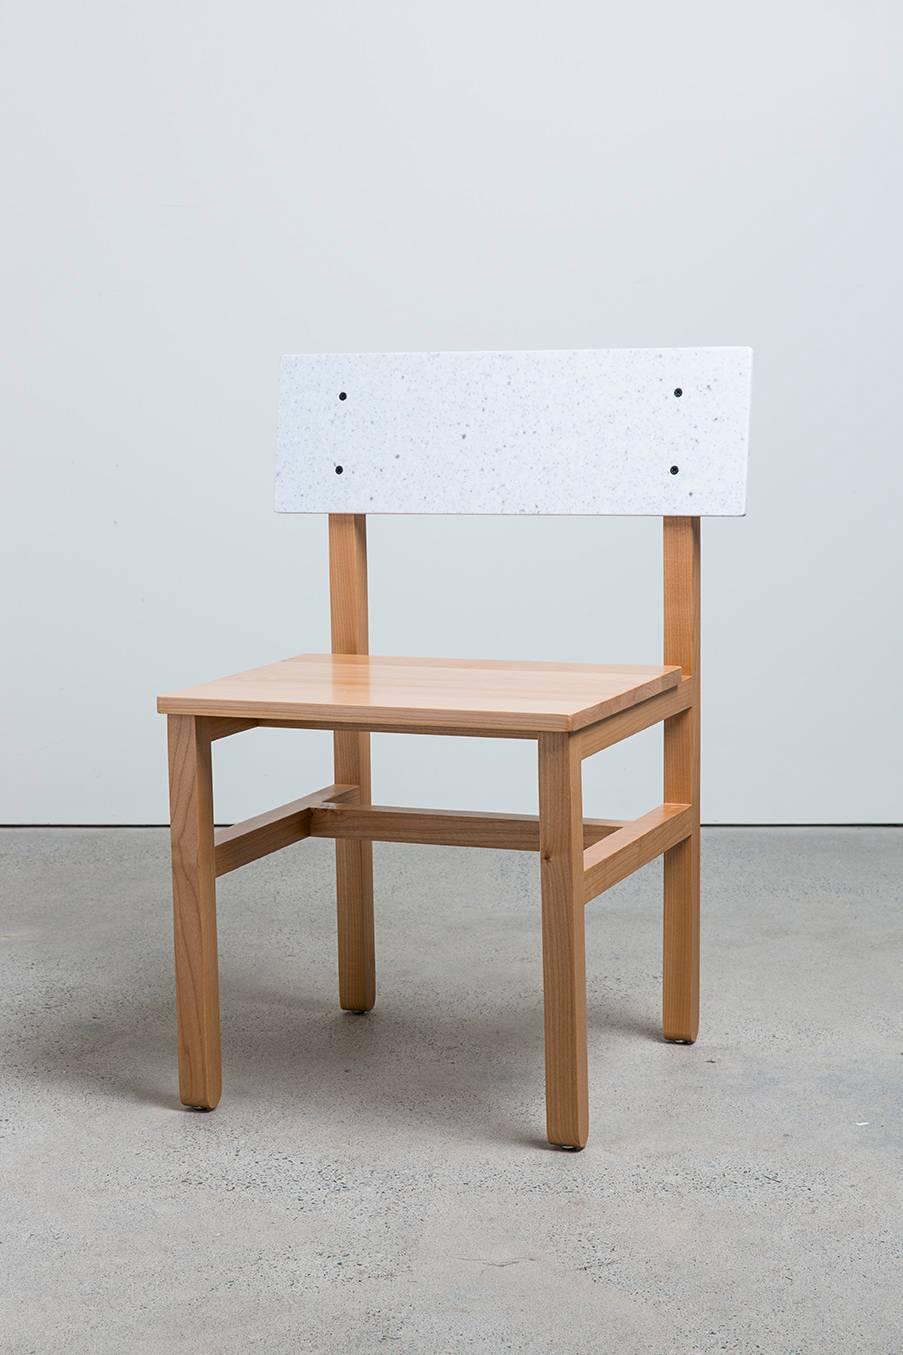 Literally the second chair designed from the studio, this chair is all about simplicity. Made from Pacific Maple and varying Solid Surface material, these chairs are created as an effort to produce an elementally basic, yet comfortable chair. A